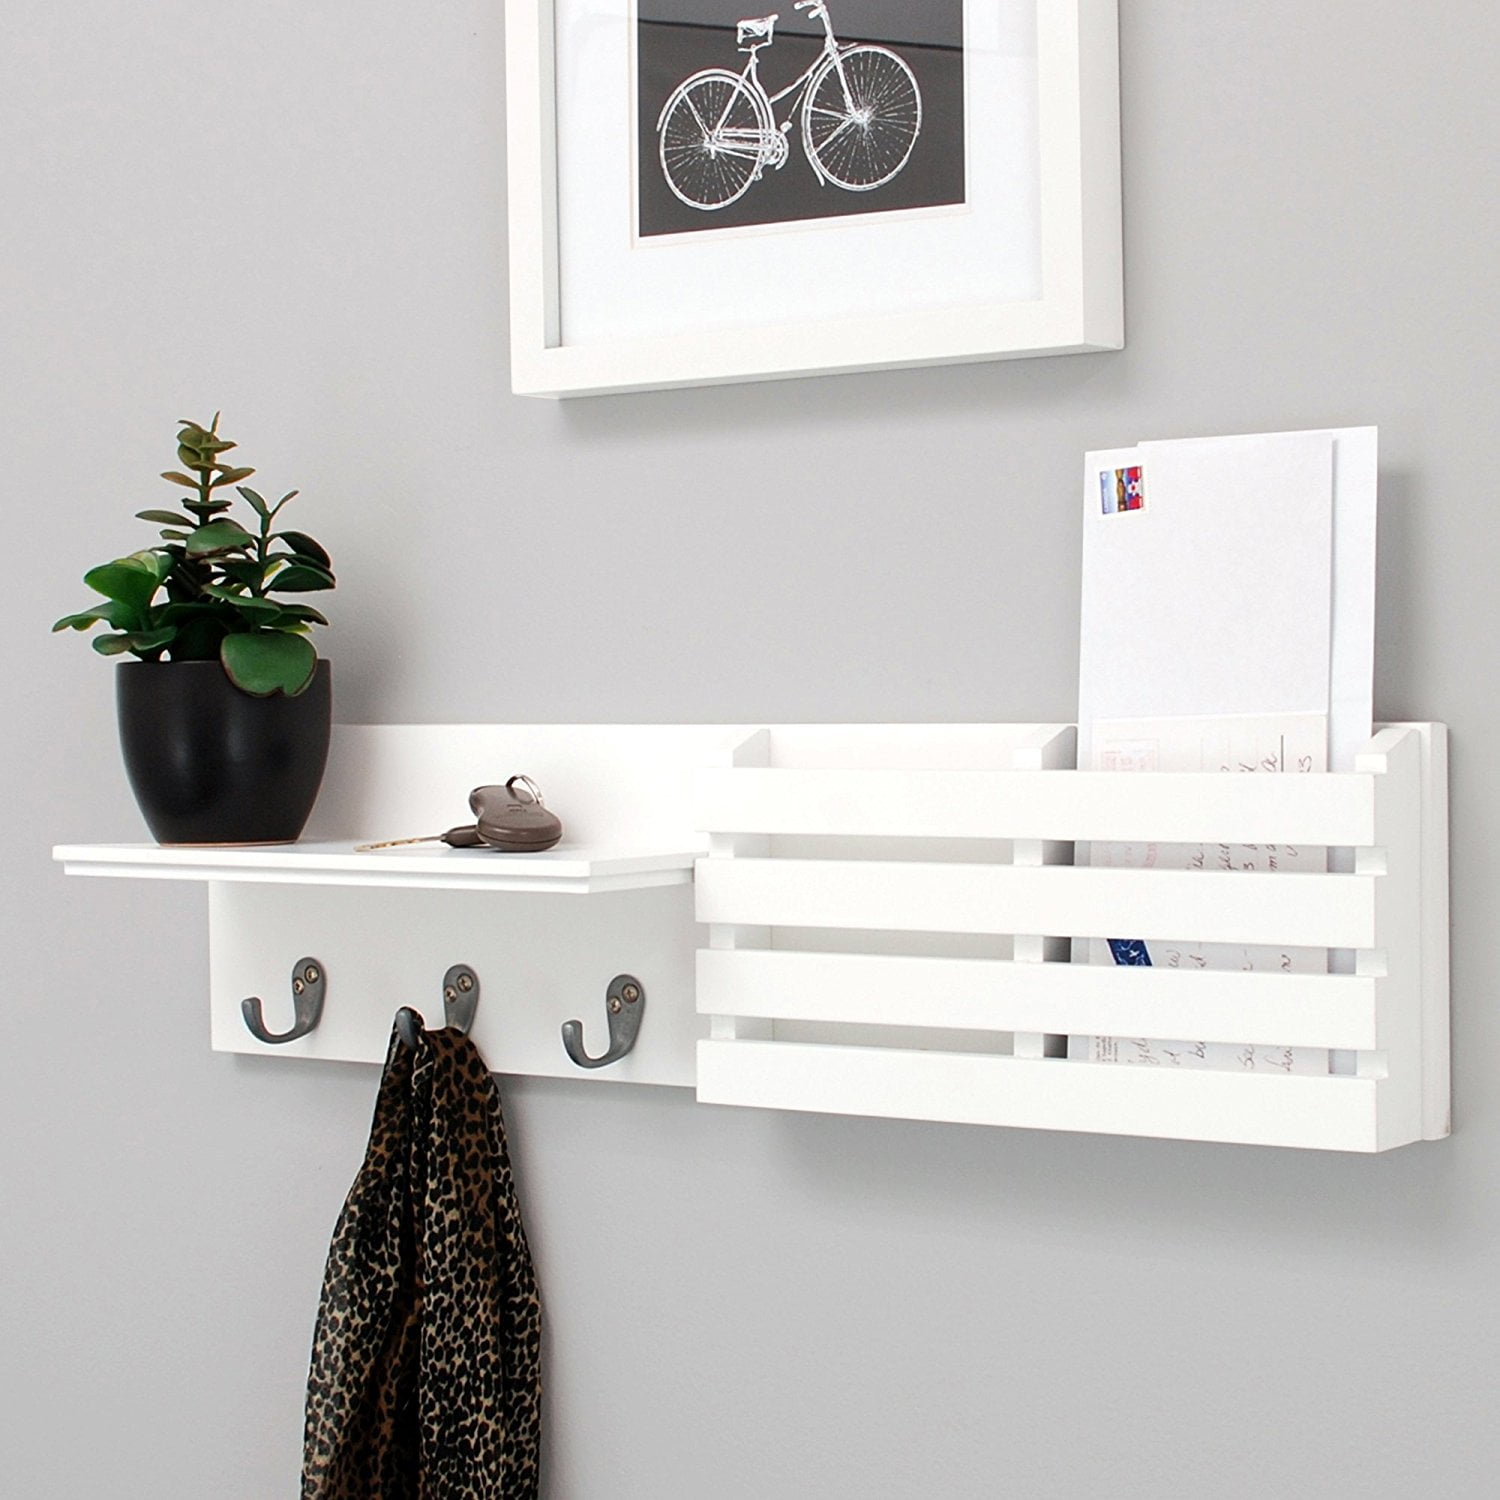 Wall Shelf and Mail Holder with 3 Hooks 24-Inch by 6-Inch White 